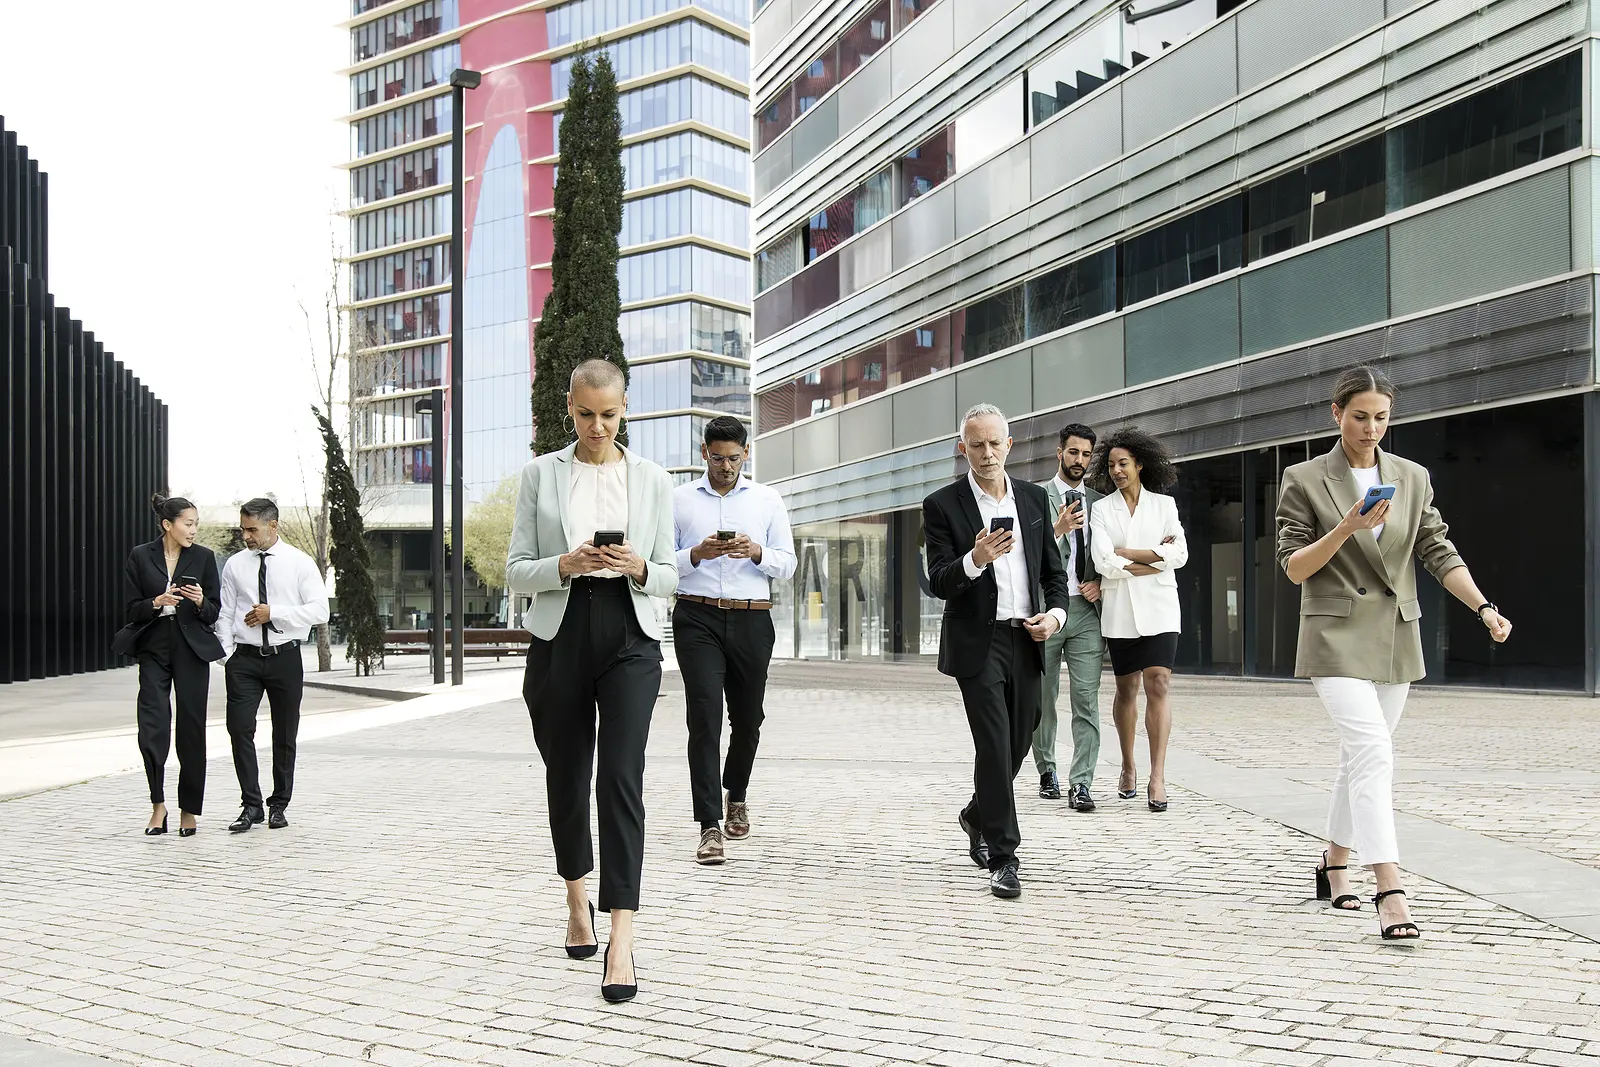 Group of confident business people walking the street using their phones. Diverse team of focused businesswoman and businessman walking outside while texting on their smartphones.